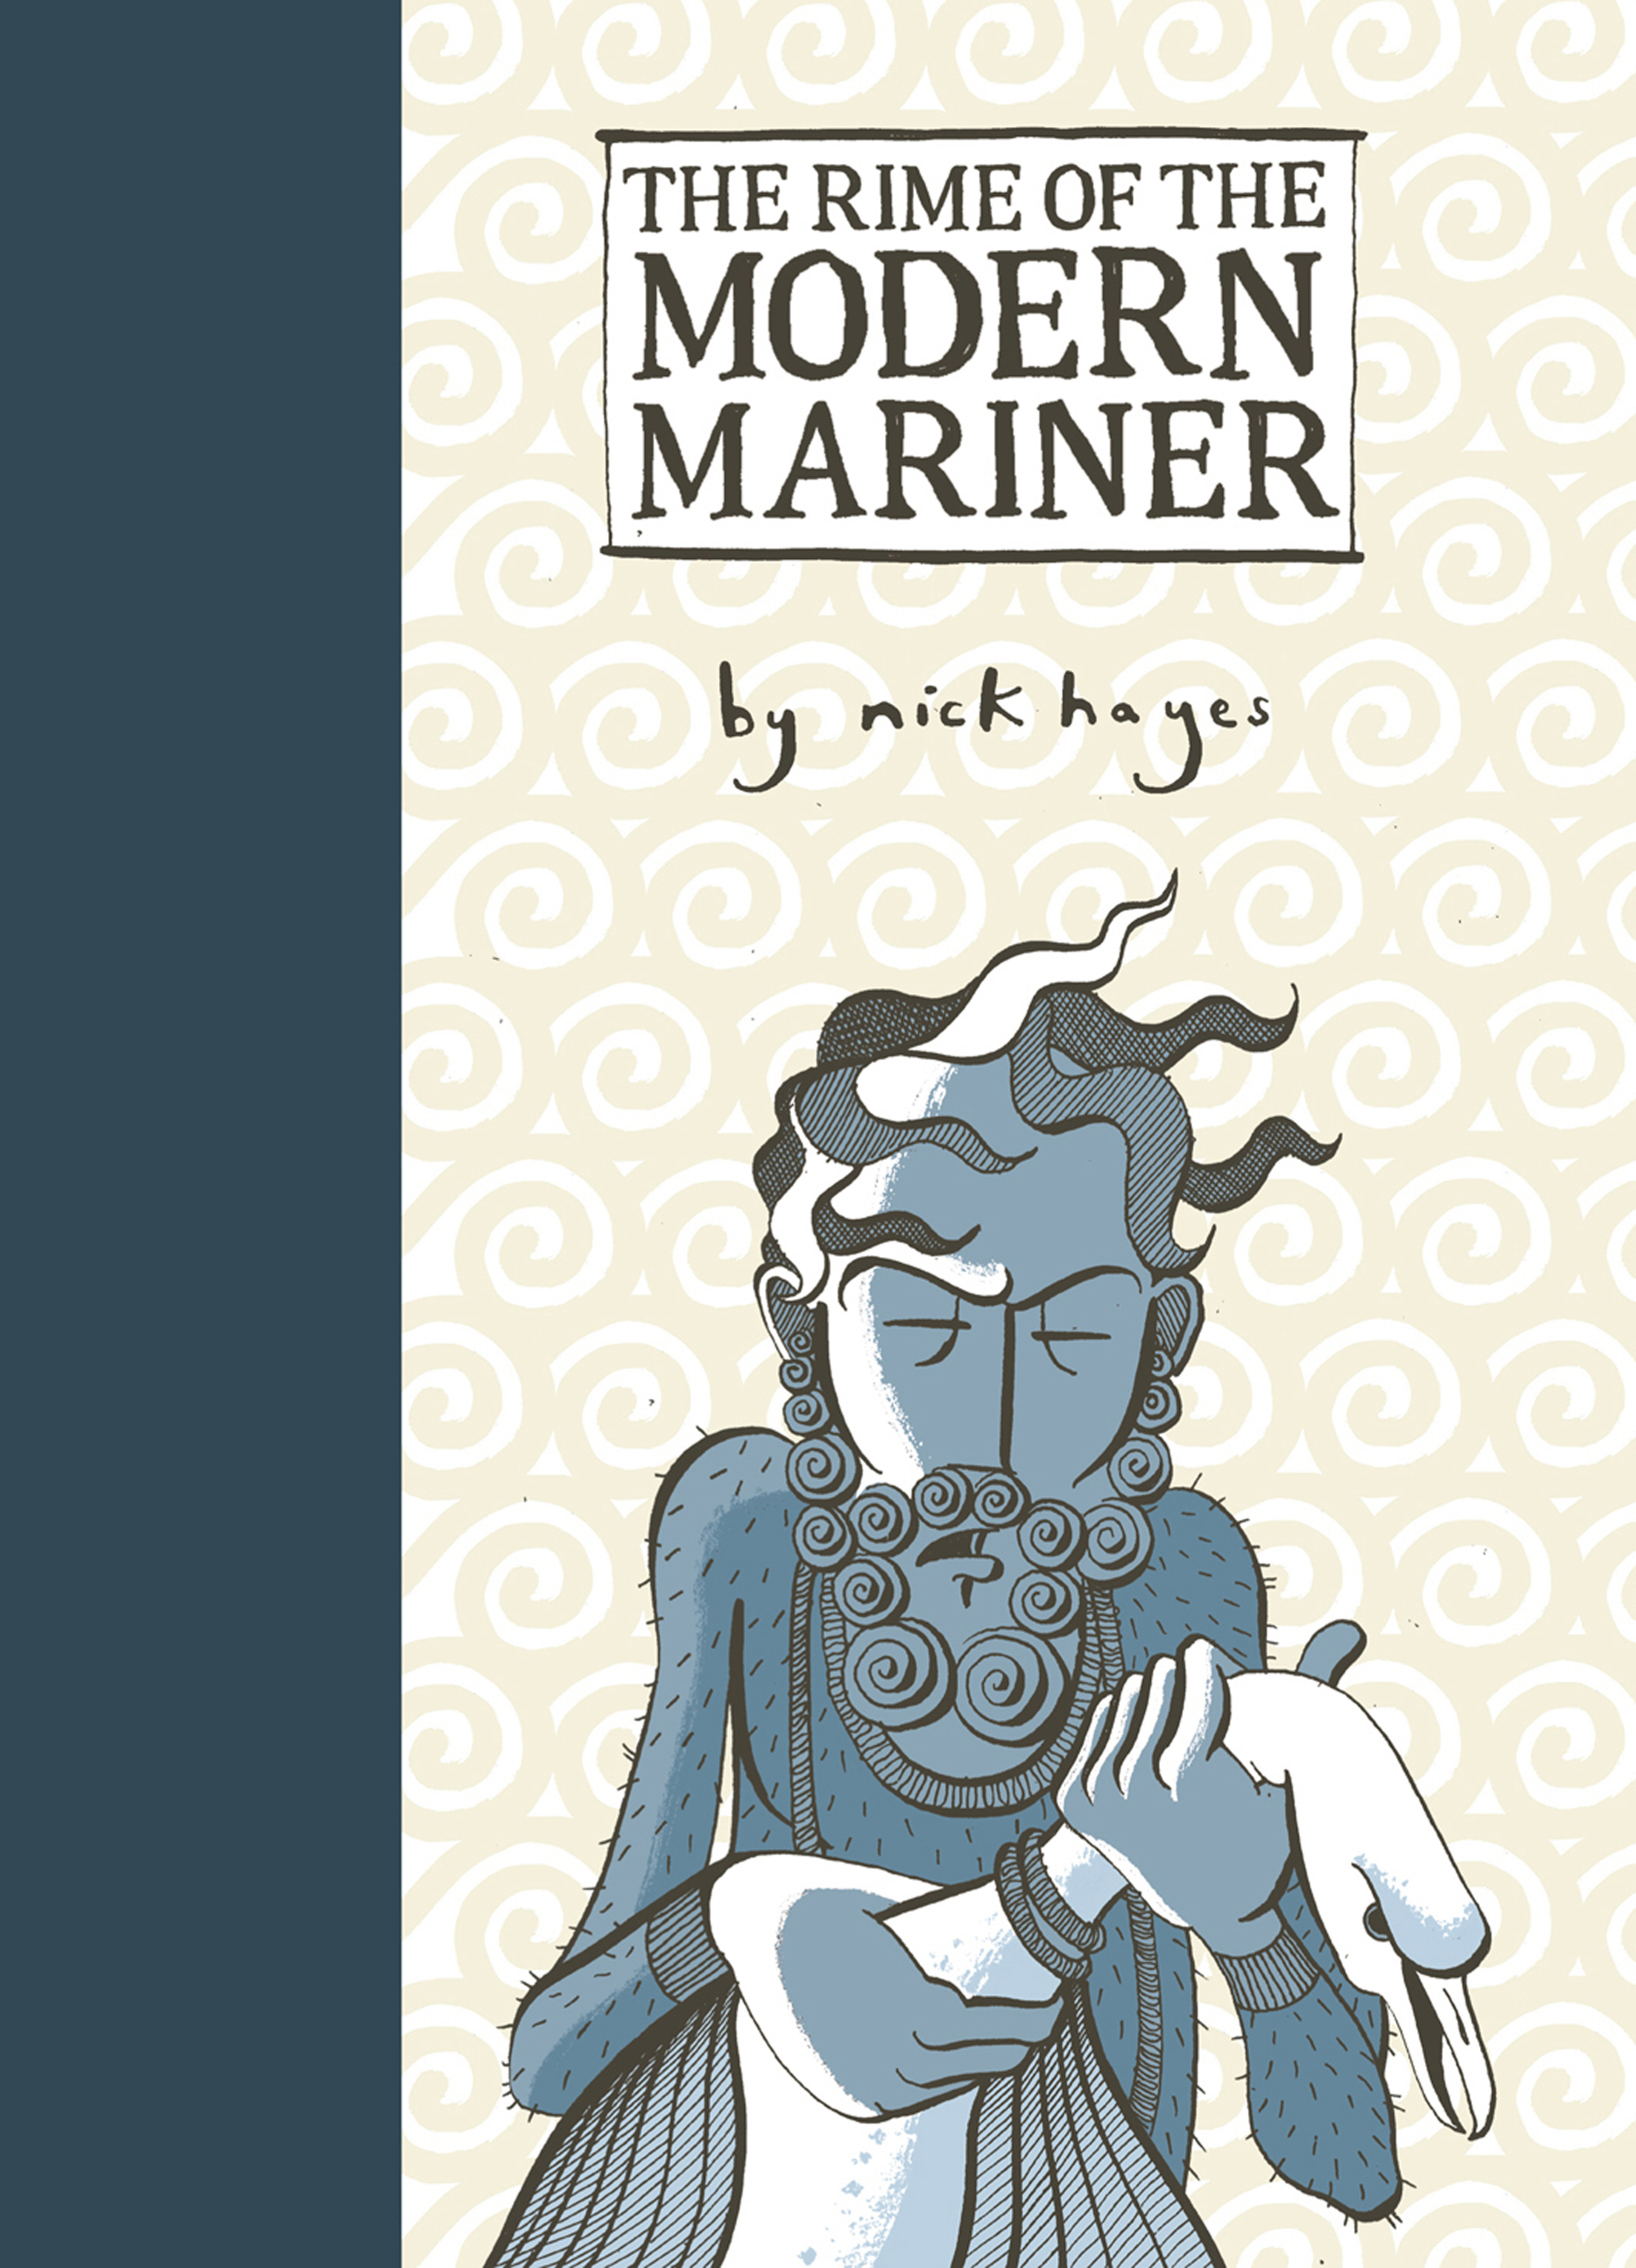 The Rime of the Modern Mariner, by Nick Hayes